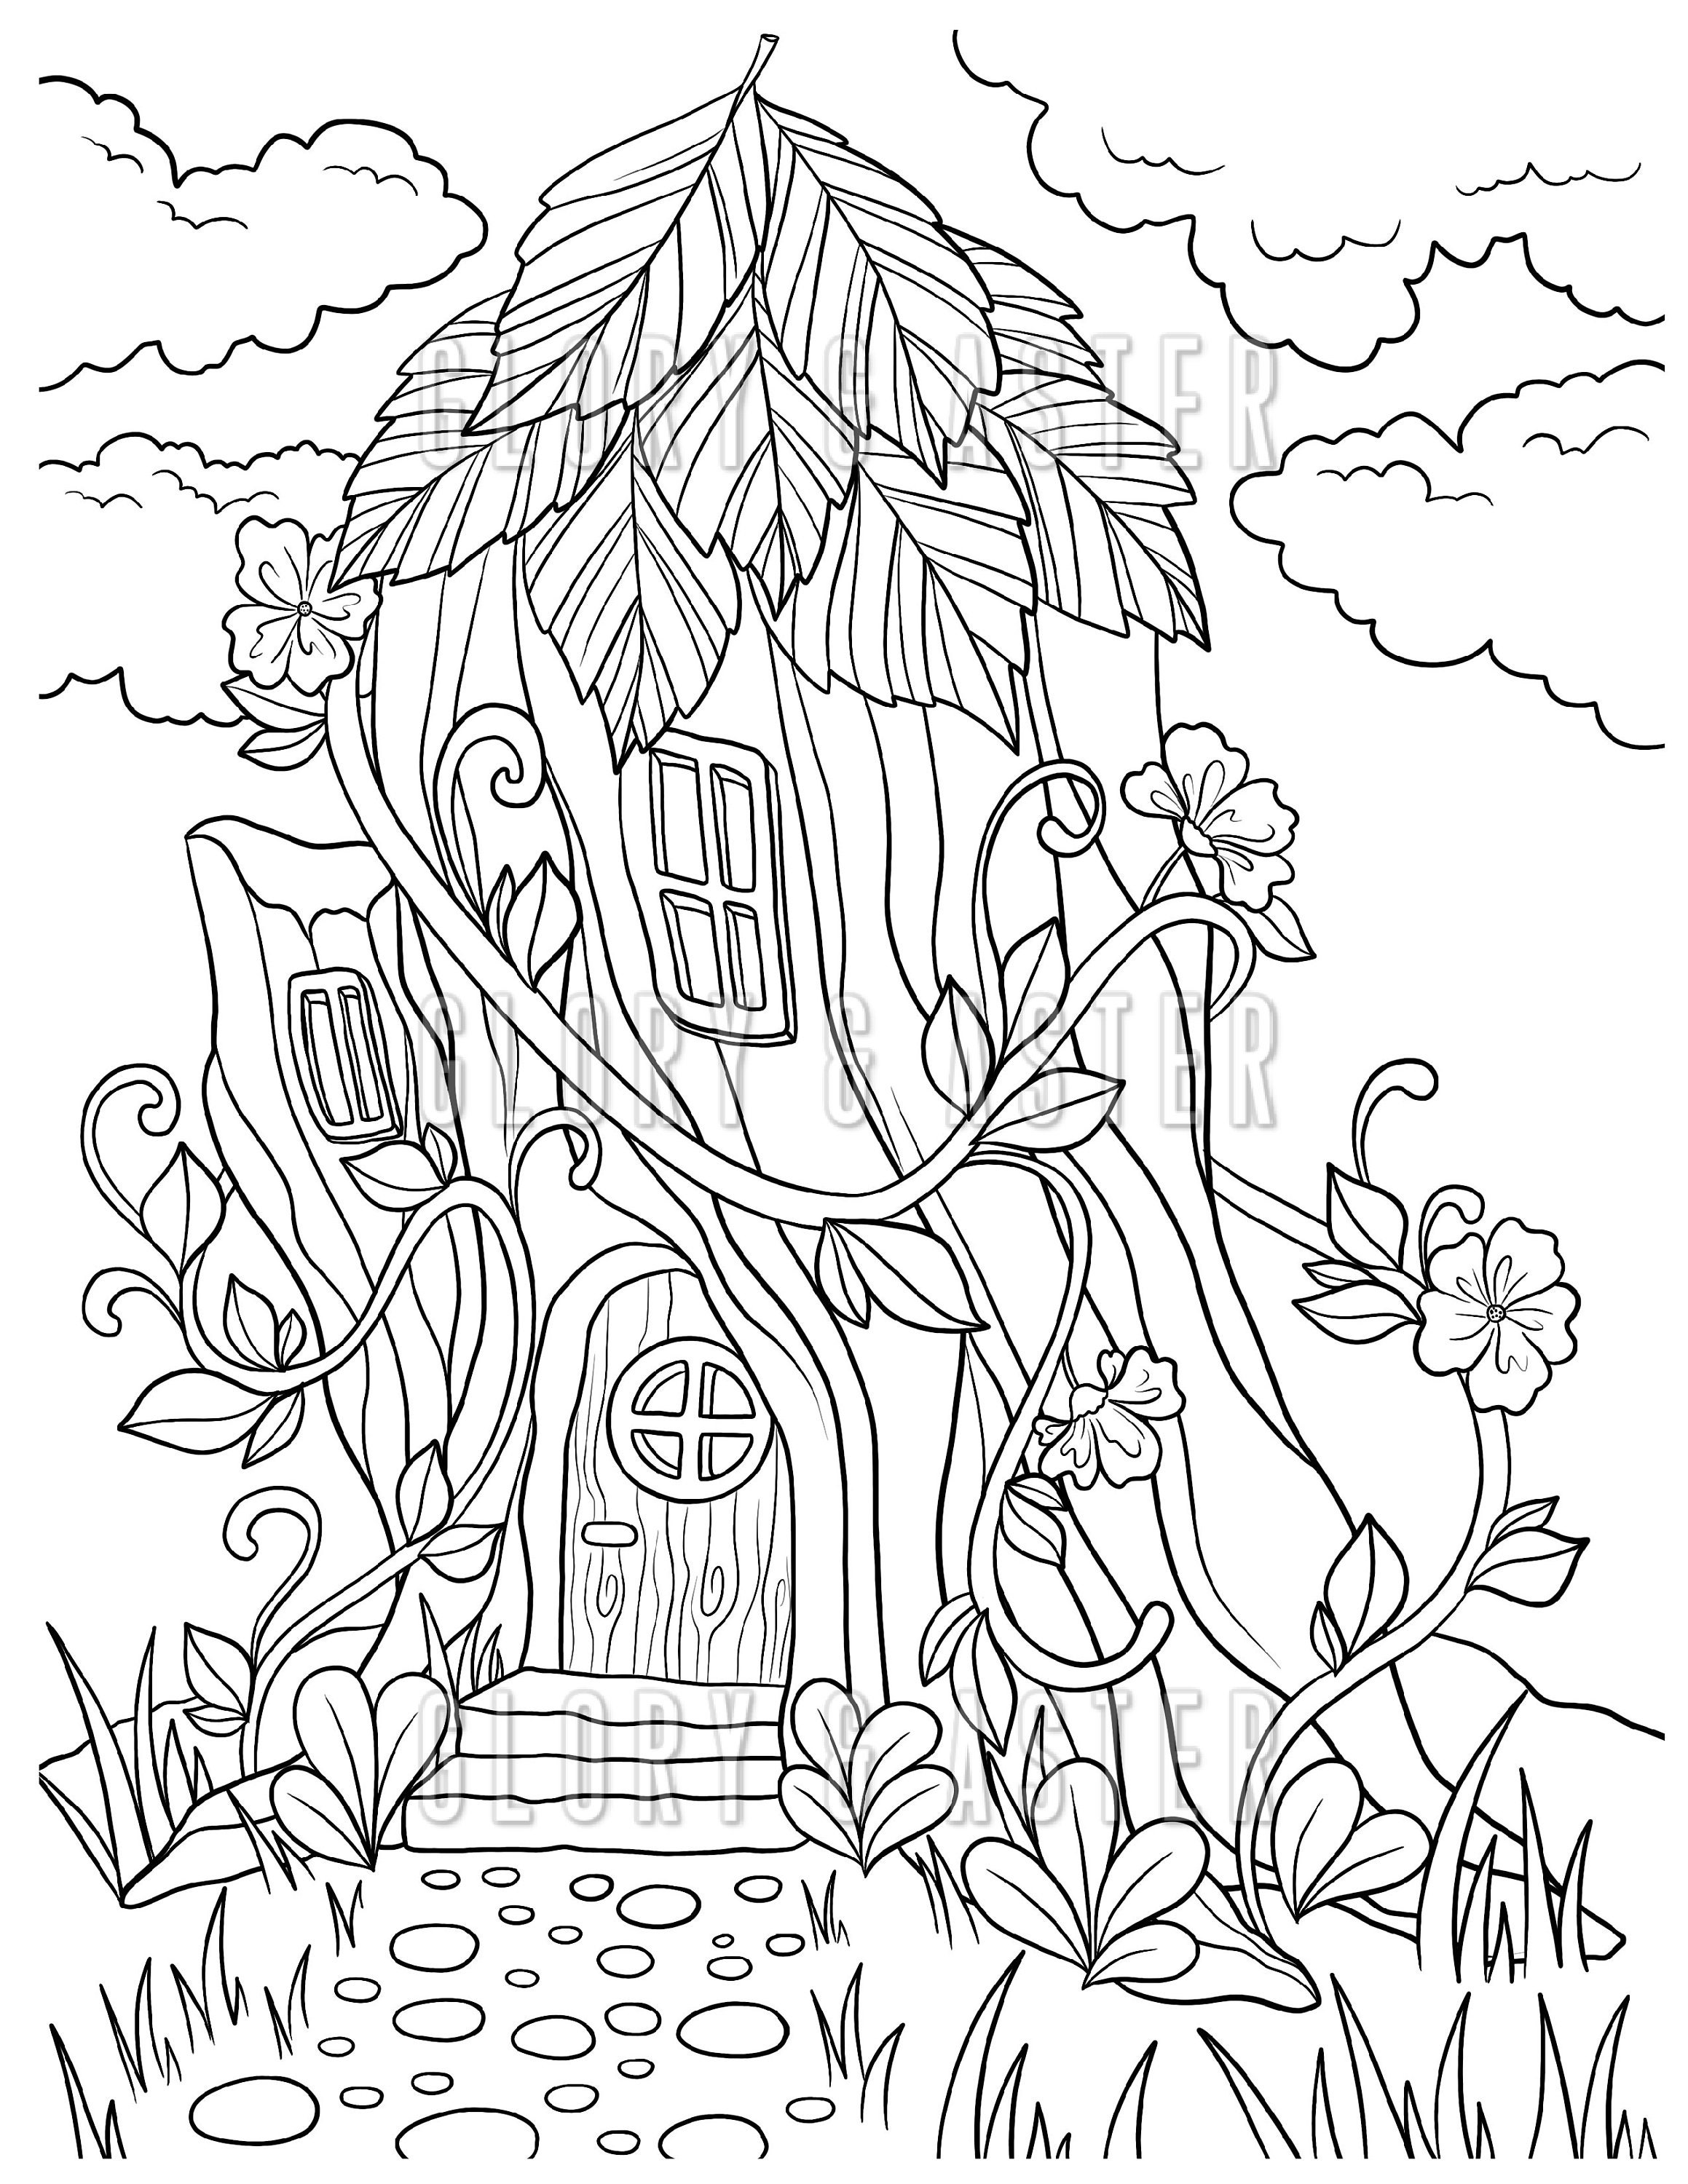 coloring-pages-of-fairy-houses